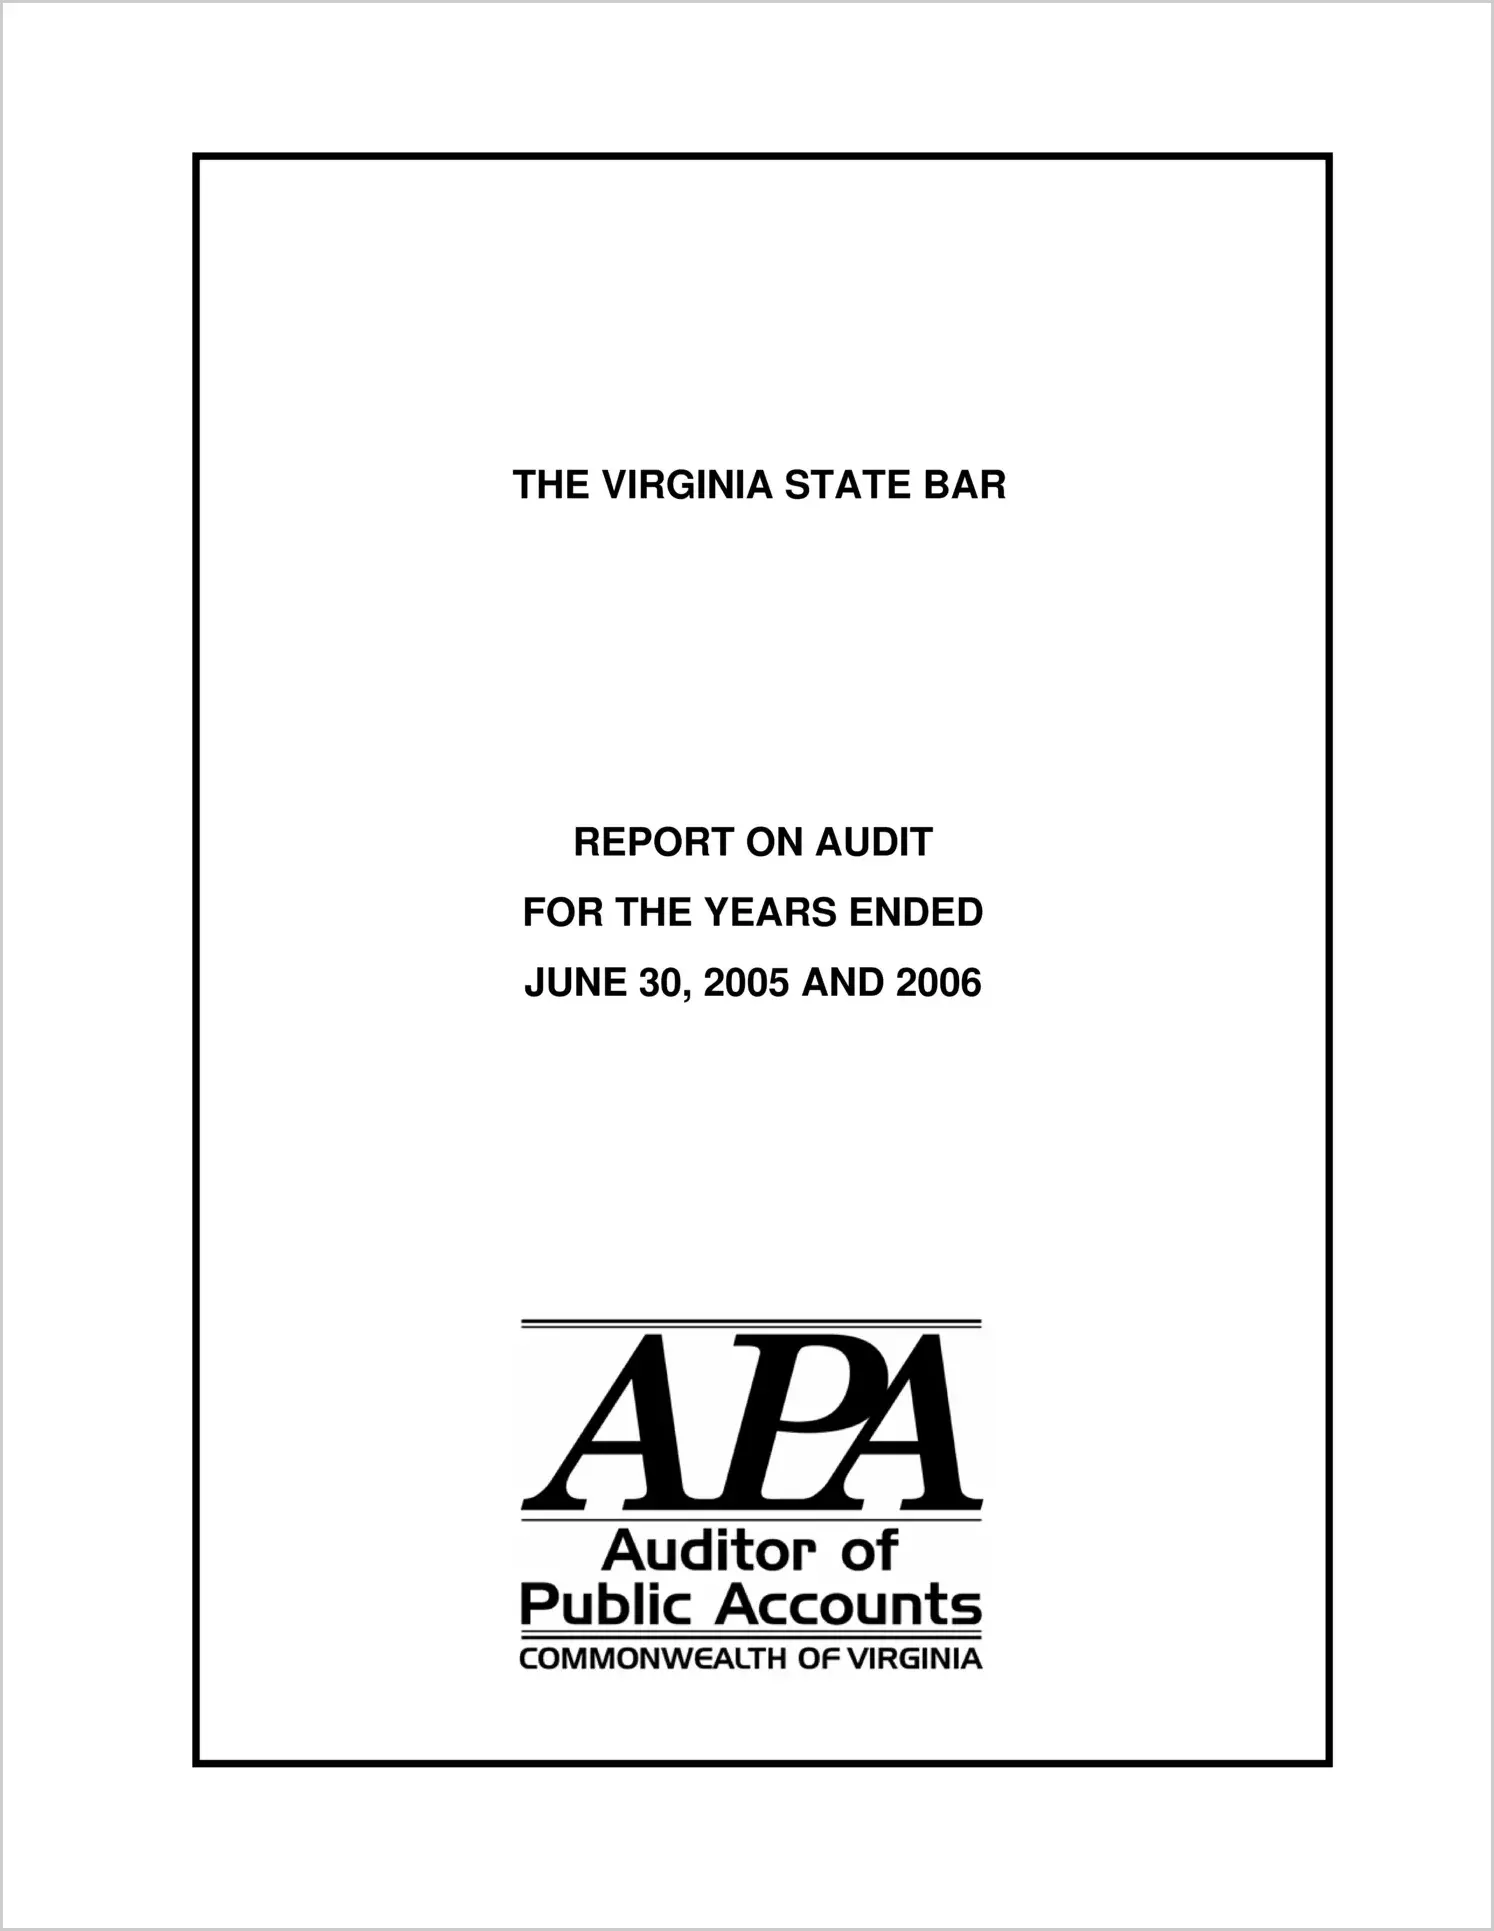 Virginia State Bar for the year ended June 30, 2005 and 2006